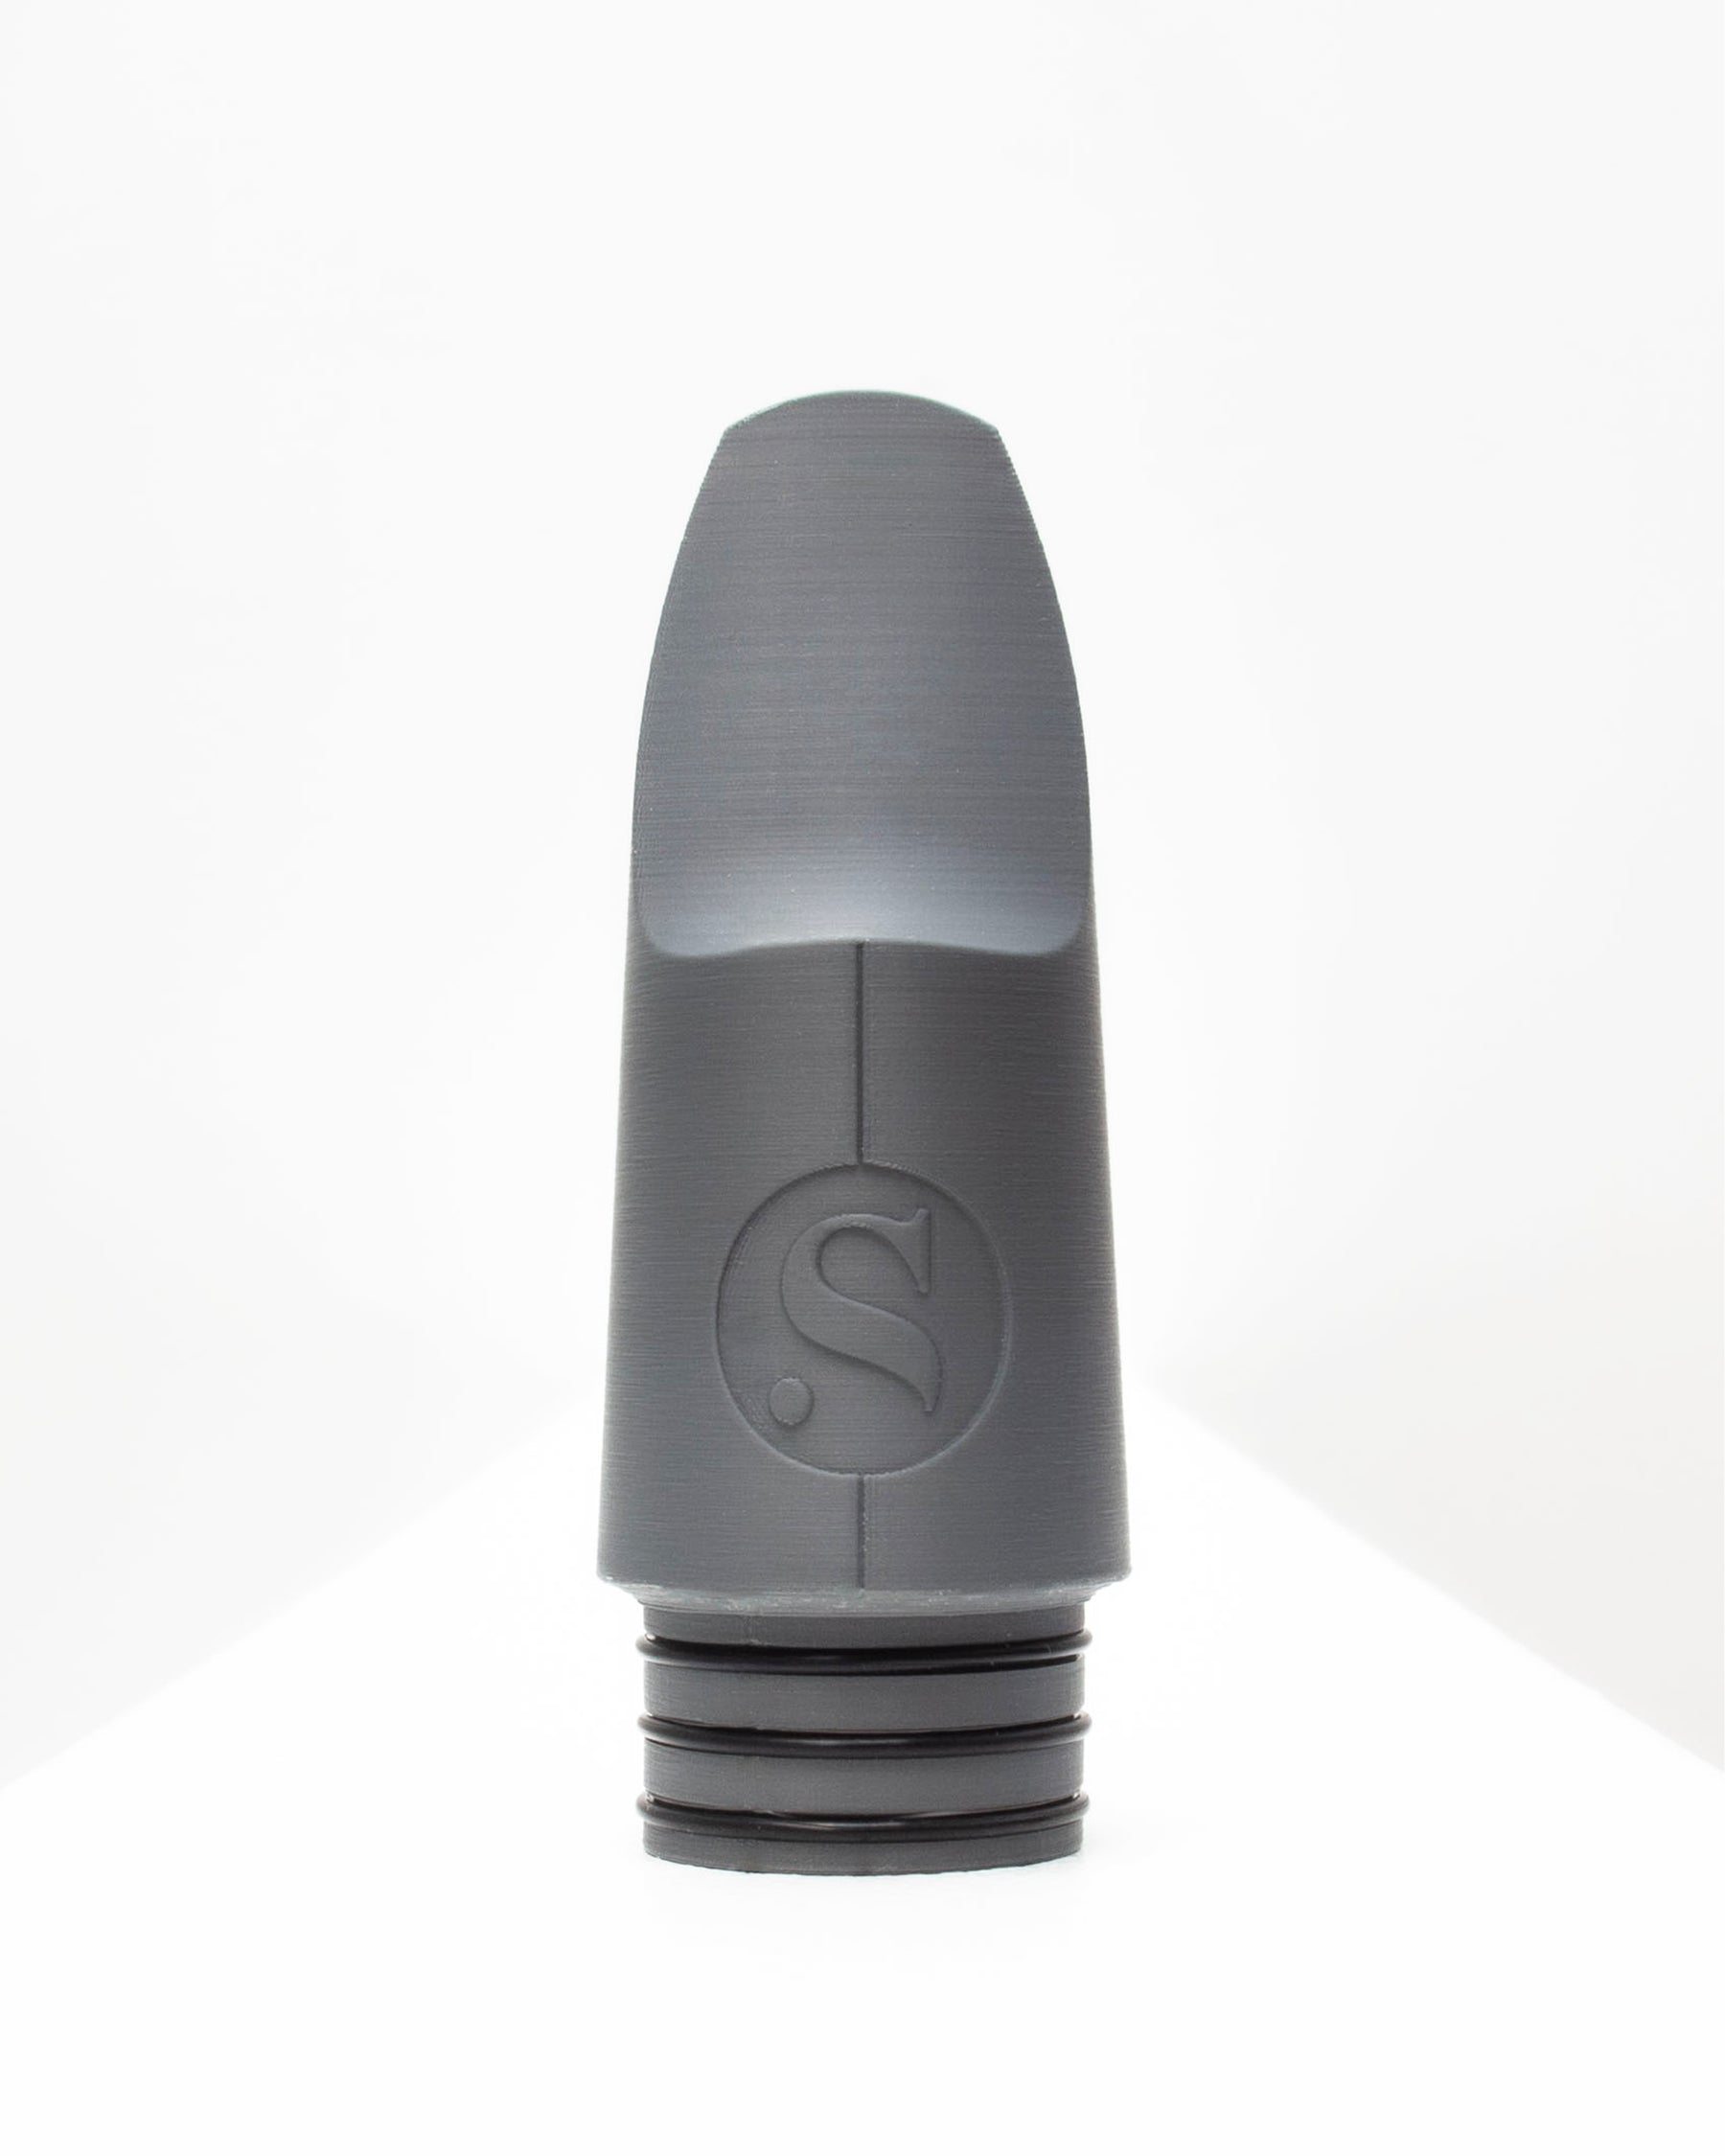 Bass Signature Clarinet mouthpiece - Daro Behroozi by Syos - Anthracite Metal